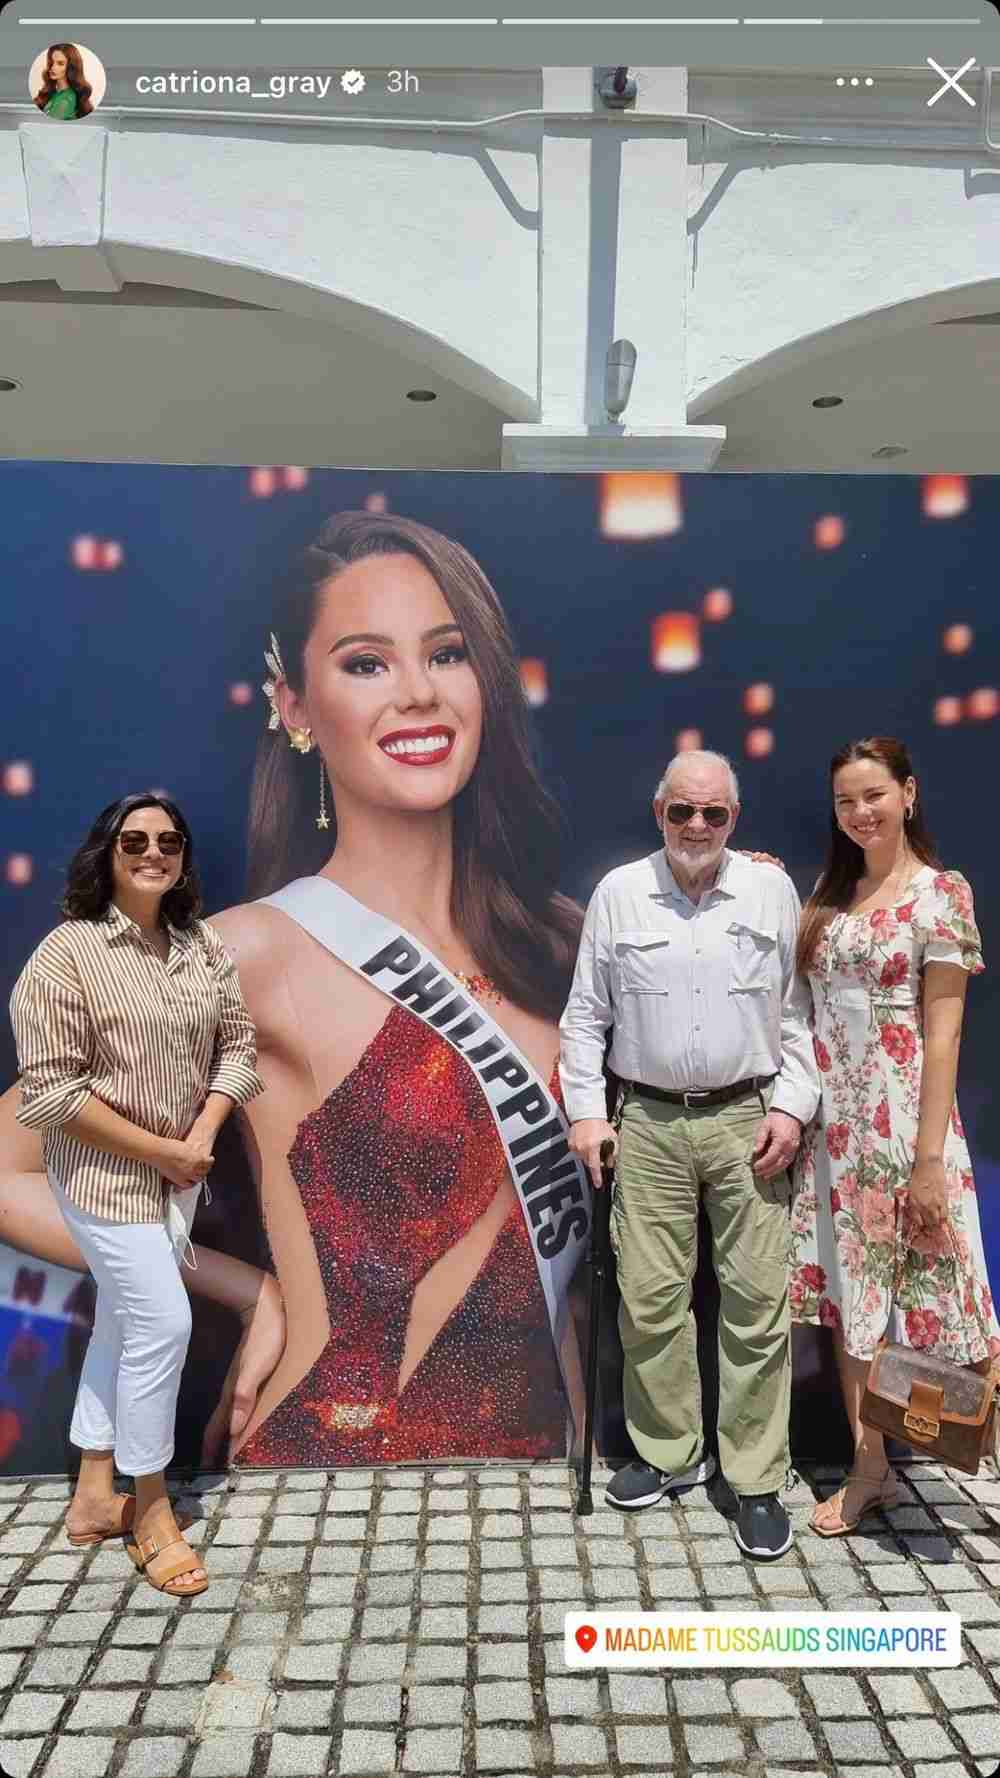 Catriona Gray and parents visit Madame Tussauds Singapore